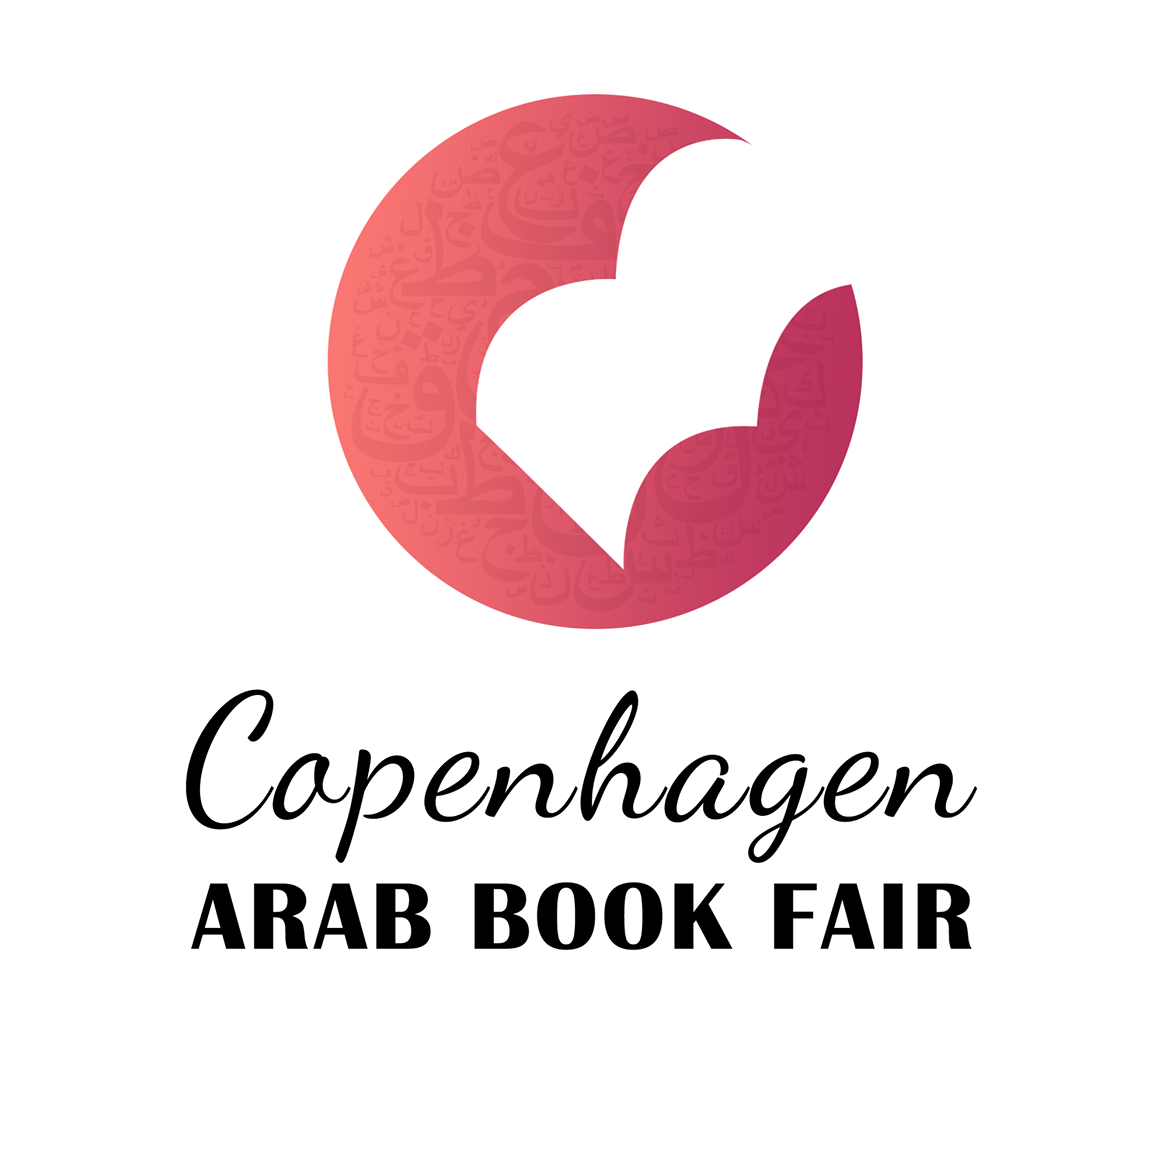 The Center participated in the second session of Copenhagen International Arab Book Fair